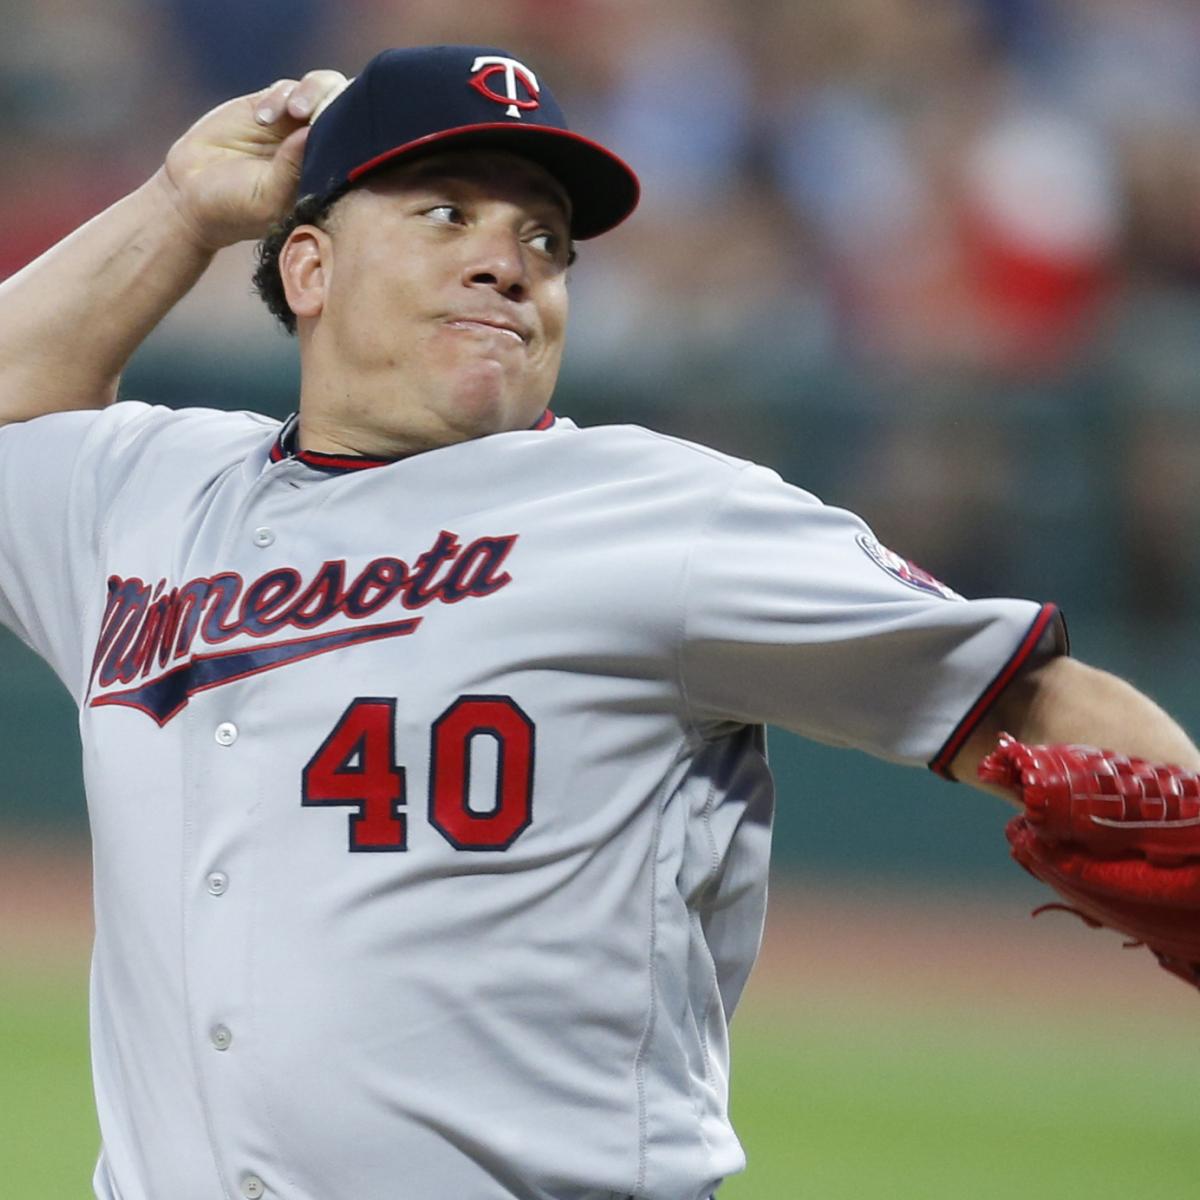 44-Year-Old Bartolo Colon Plans to Pitch in MLB for 2018 Season